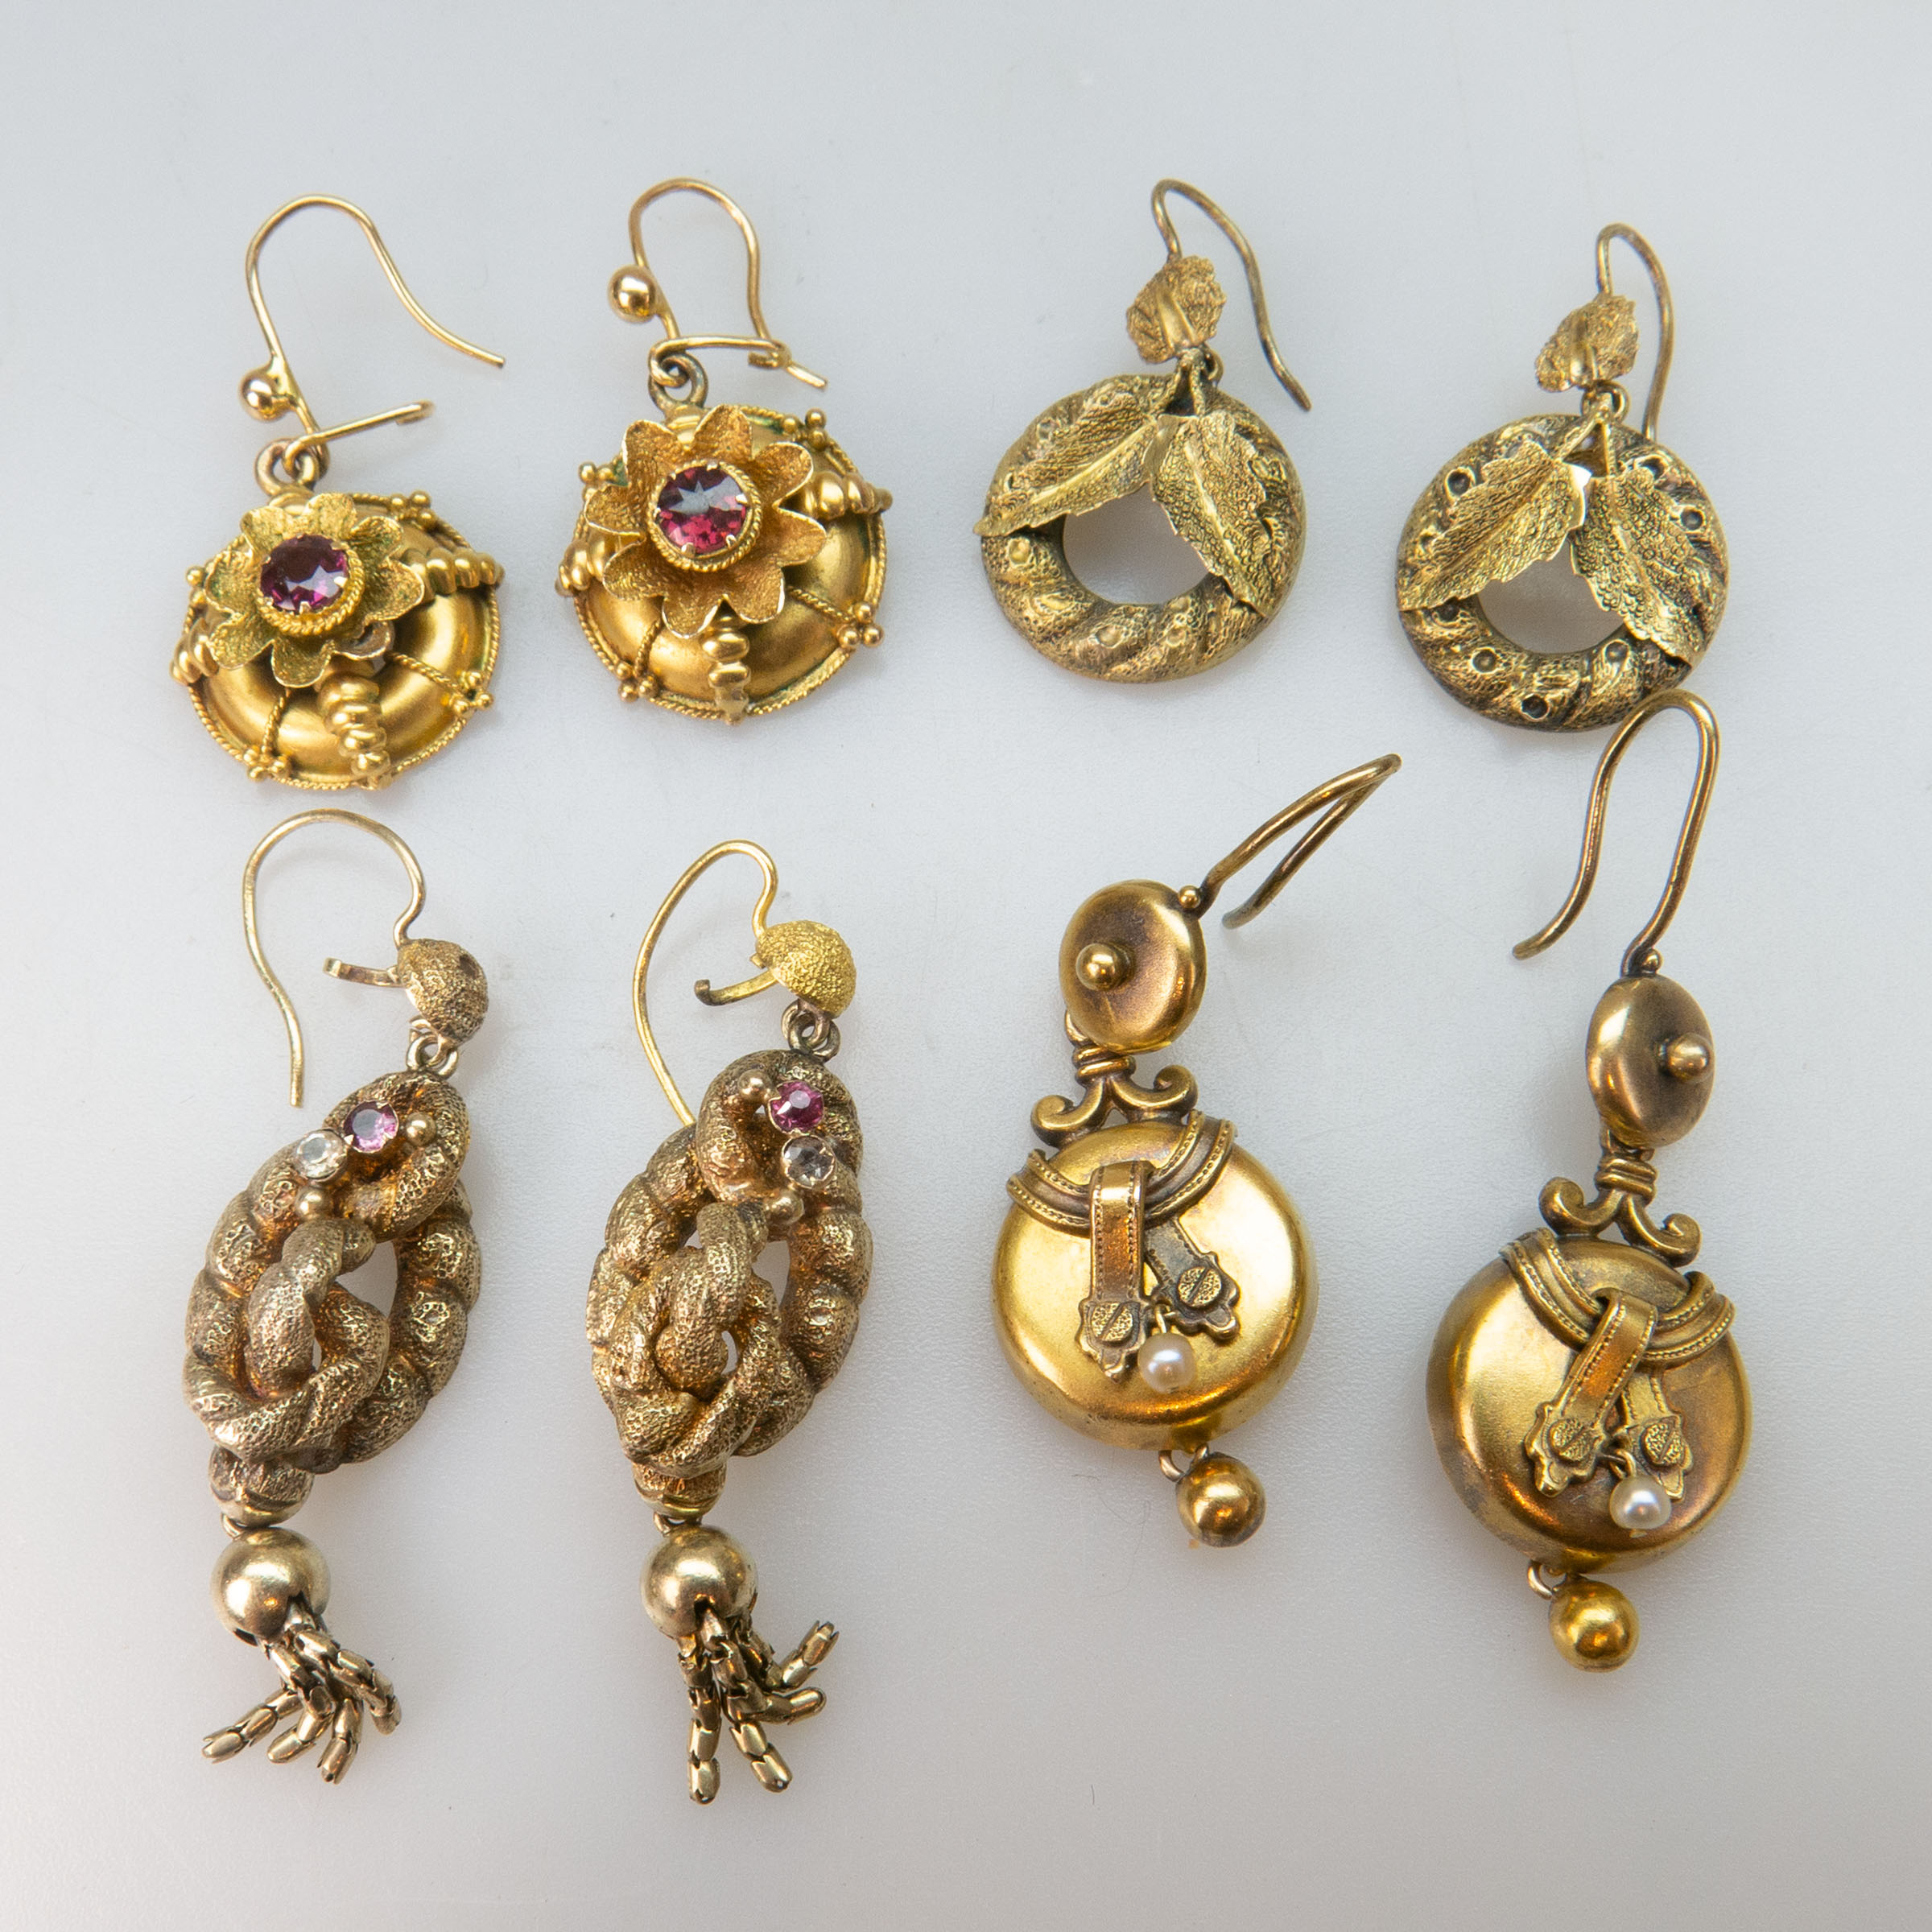 4 Pairs Of 19th Century Gold Hook-Back Earrings